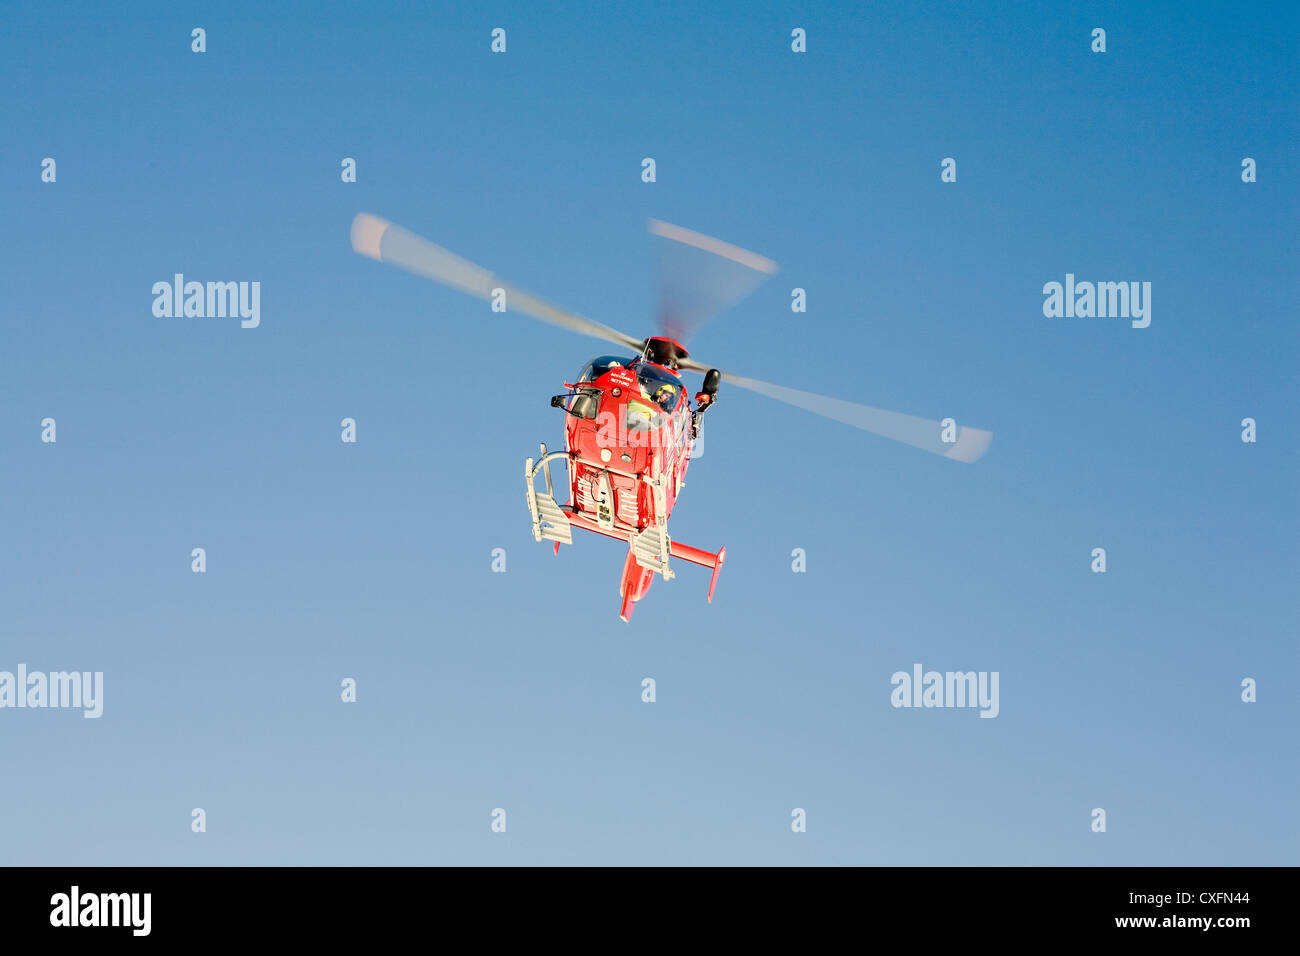 Air Ambulance attending a serious skiing accident on a piste in Selva Val Gardena Dolomites Italy. Helicopter type EC 135 Stock Photo